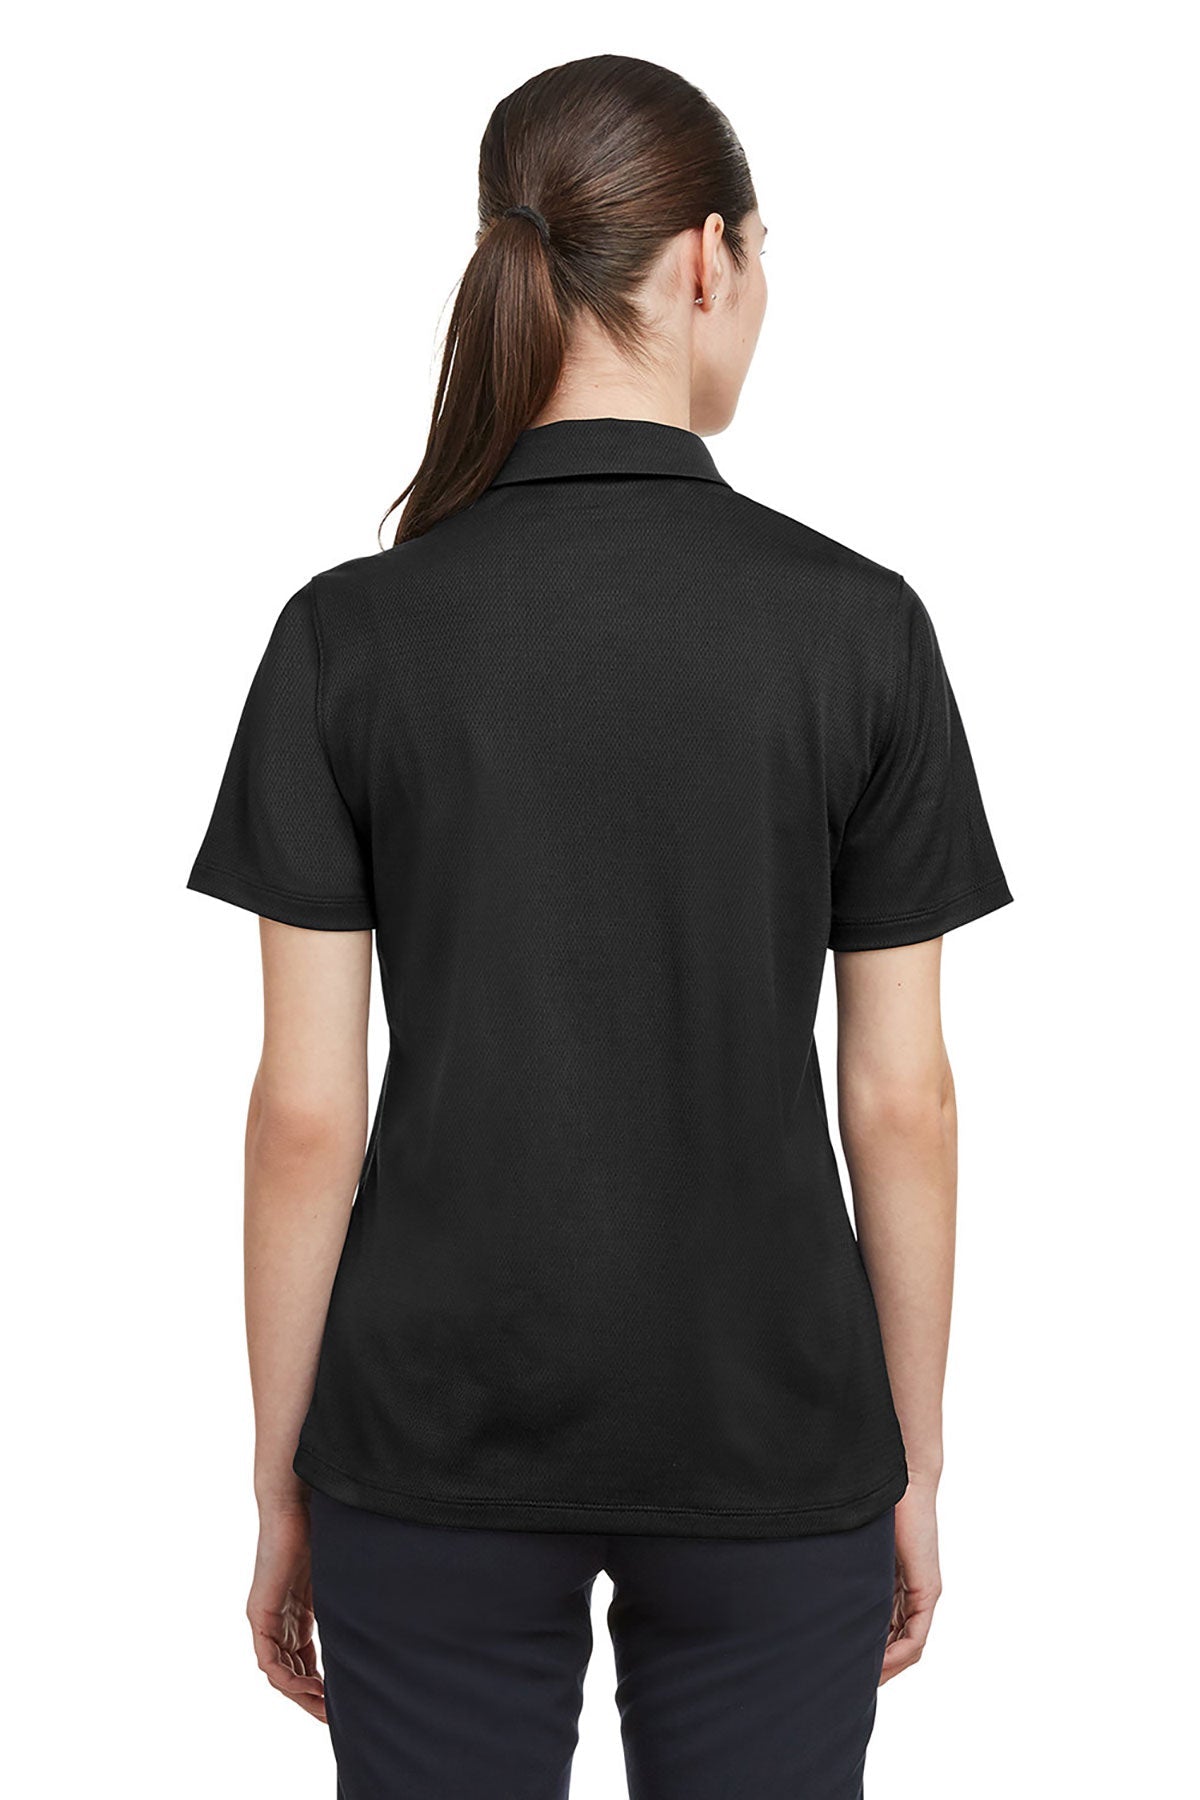 Under Armour Ladies Tech Polo, Black [GuidePoint Security]